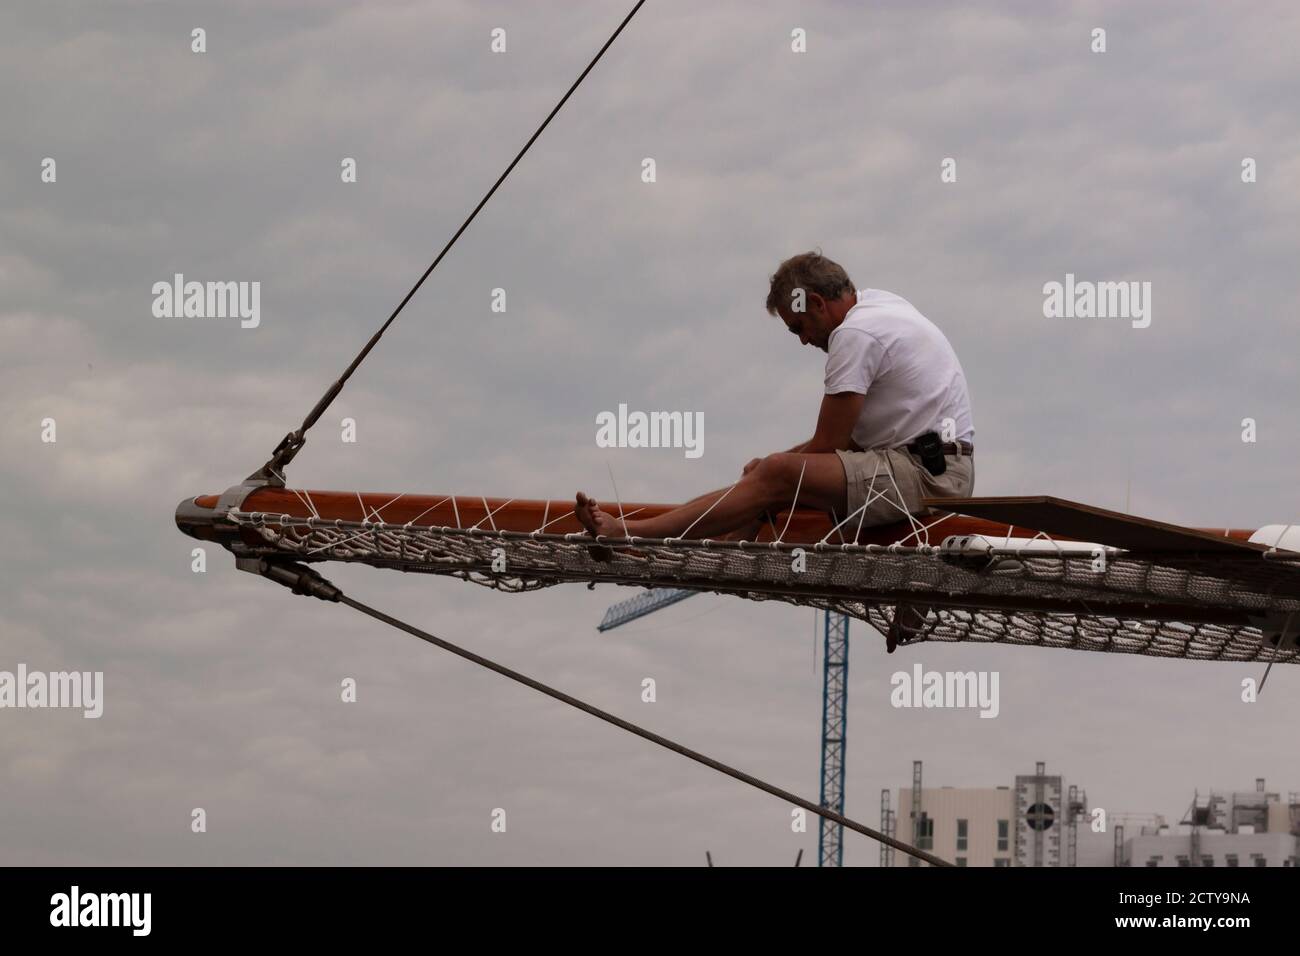 Barcelona, Spain, 05/01/2010: An athletic sailor is sitting on top of the wooden bowsprit of a large vessel trying to fix it. He wears no protective e Stock Photo